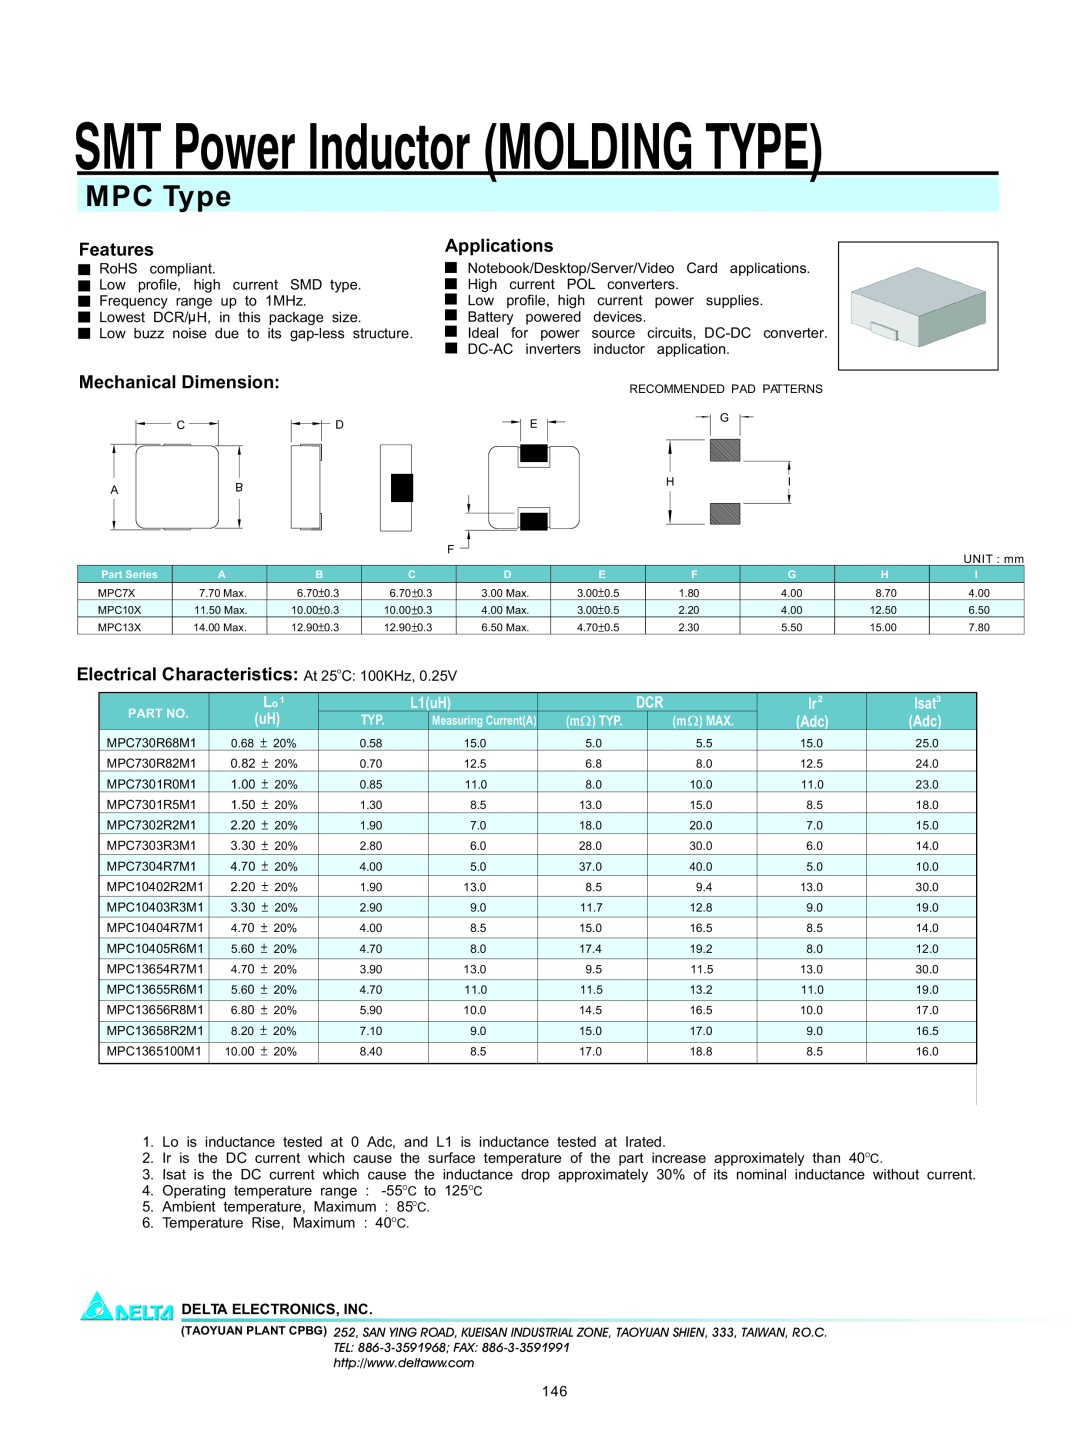 Delta Electronics MPC13X manual SMT Power Inductor MOLDING TYPE, MPC Type, Features, Mechanical Dimension, Applications 